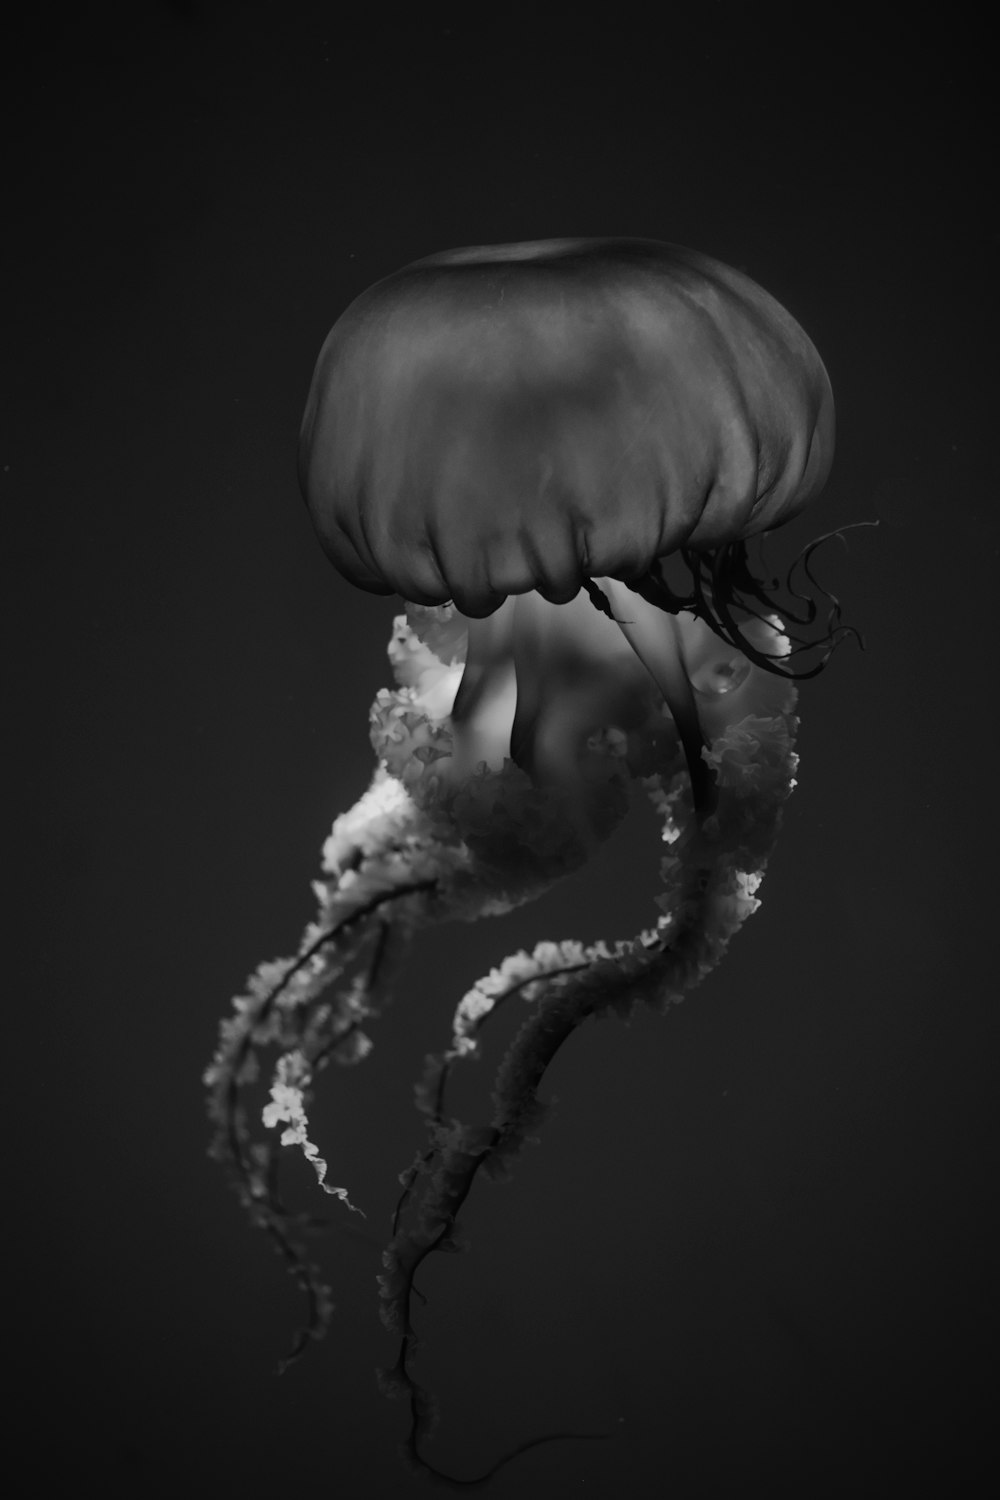 white and brown jellyfish in water